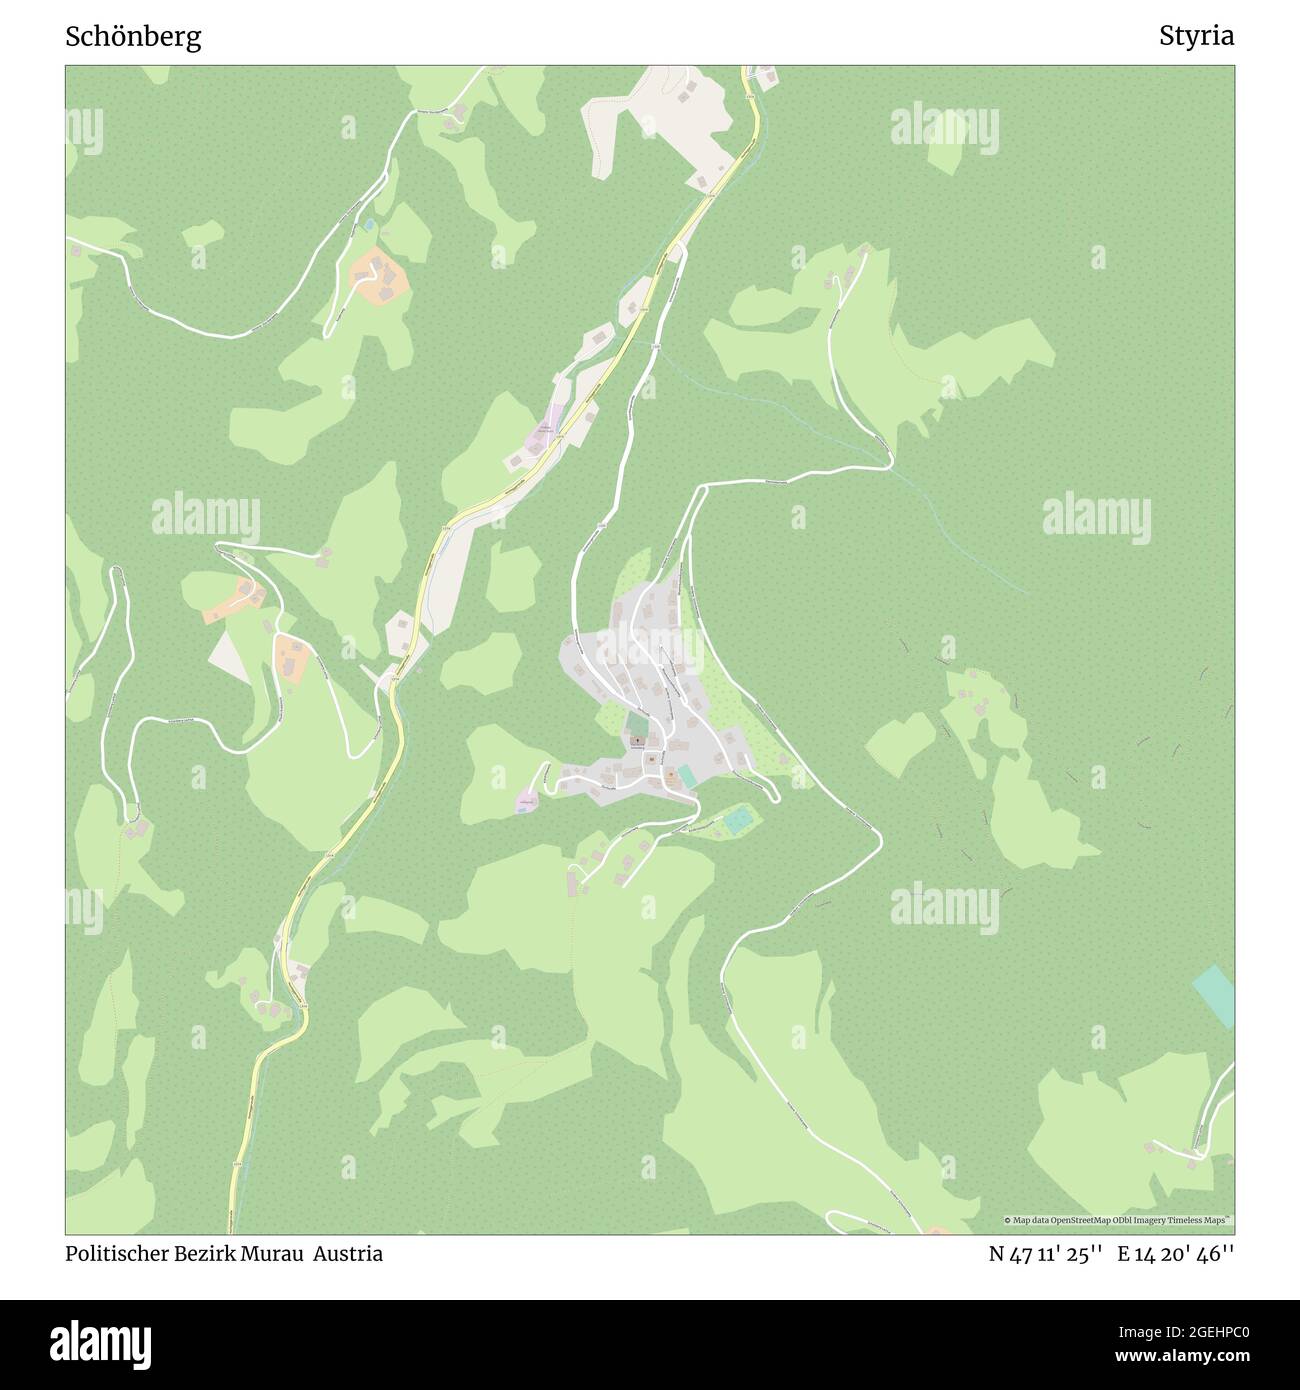 Schönberg, Politischer Bezirk Murau, Austria, Styria, N 47 11' 25'', E 14 20' 46'', map, Timeless Map published in 2021. Travelers, explorers and adventurers like Florence Nightingale, David Livingstone, Ernest Shackleton, Lewis and Clark and Sherlock Holmes relied on maps to plan travels to the world's most remote corners, Timeless Maps is mapping most locations on the globe, showing the achievement of great dreams Stock Photo